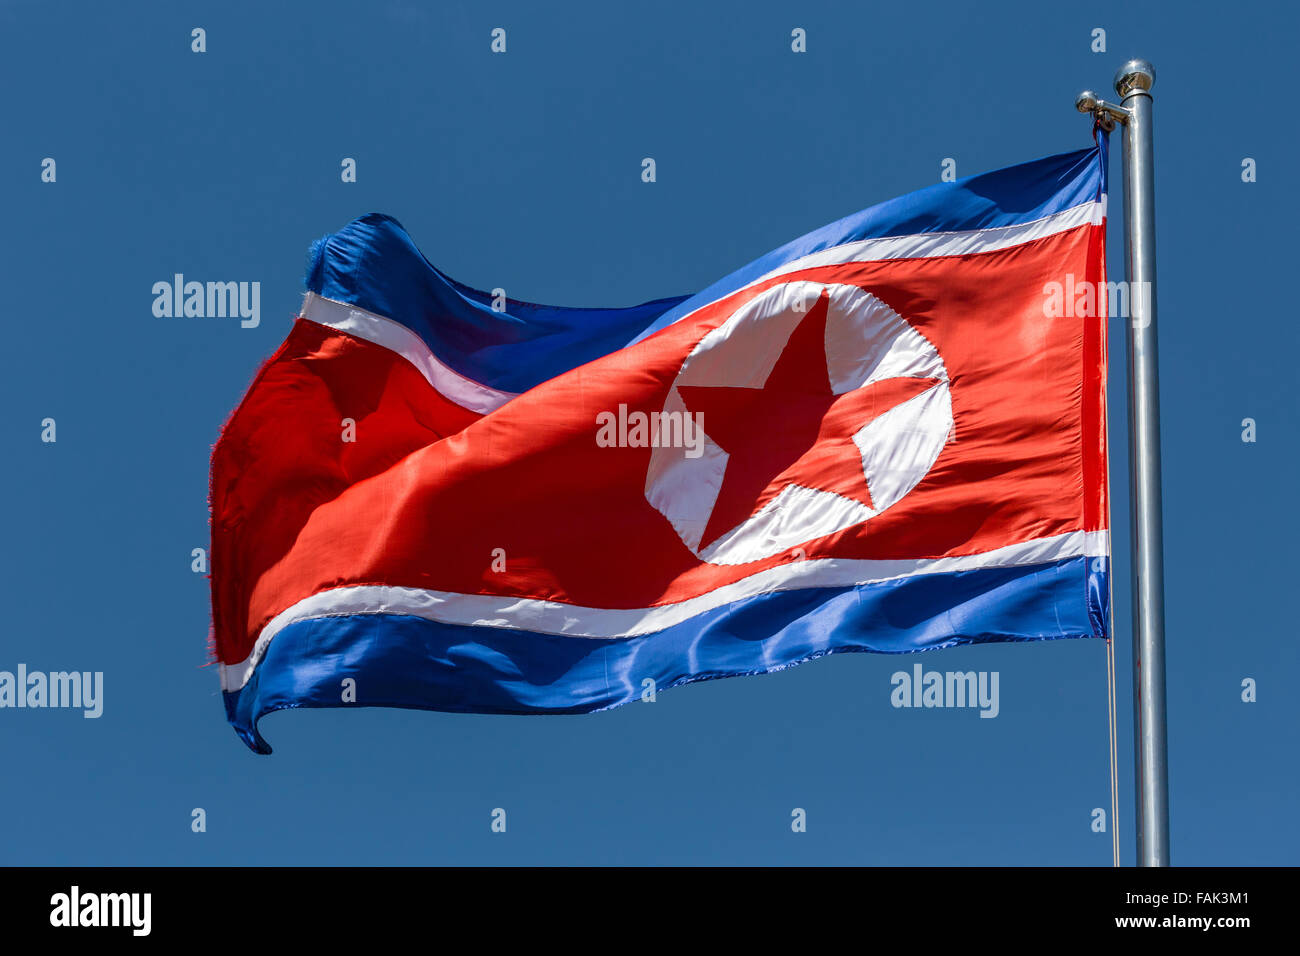 North Korea flag blowing in the wind, blue sky Stock Photo